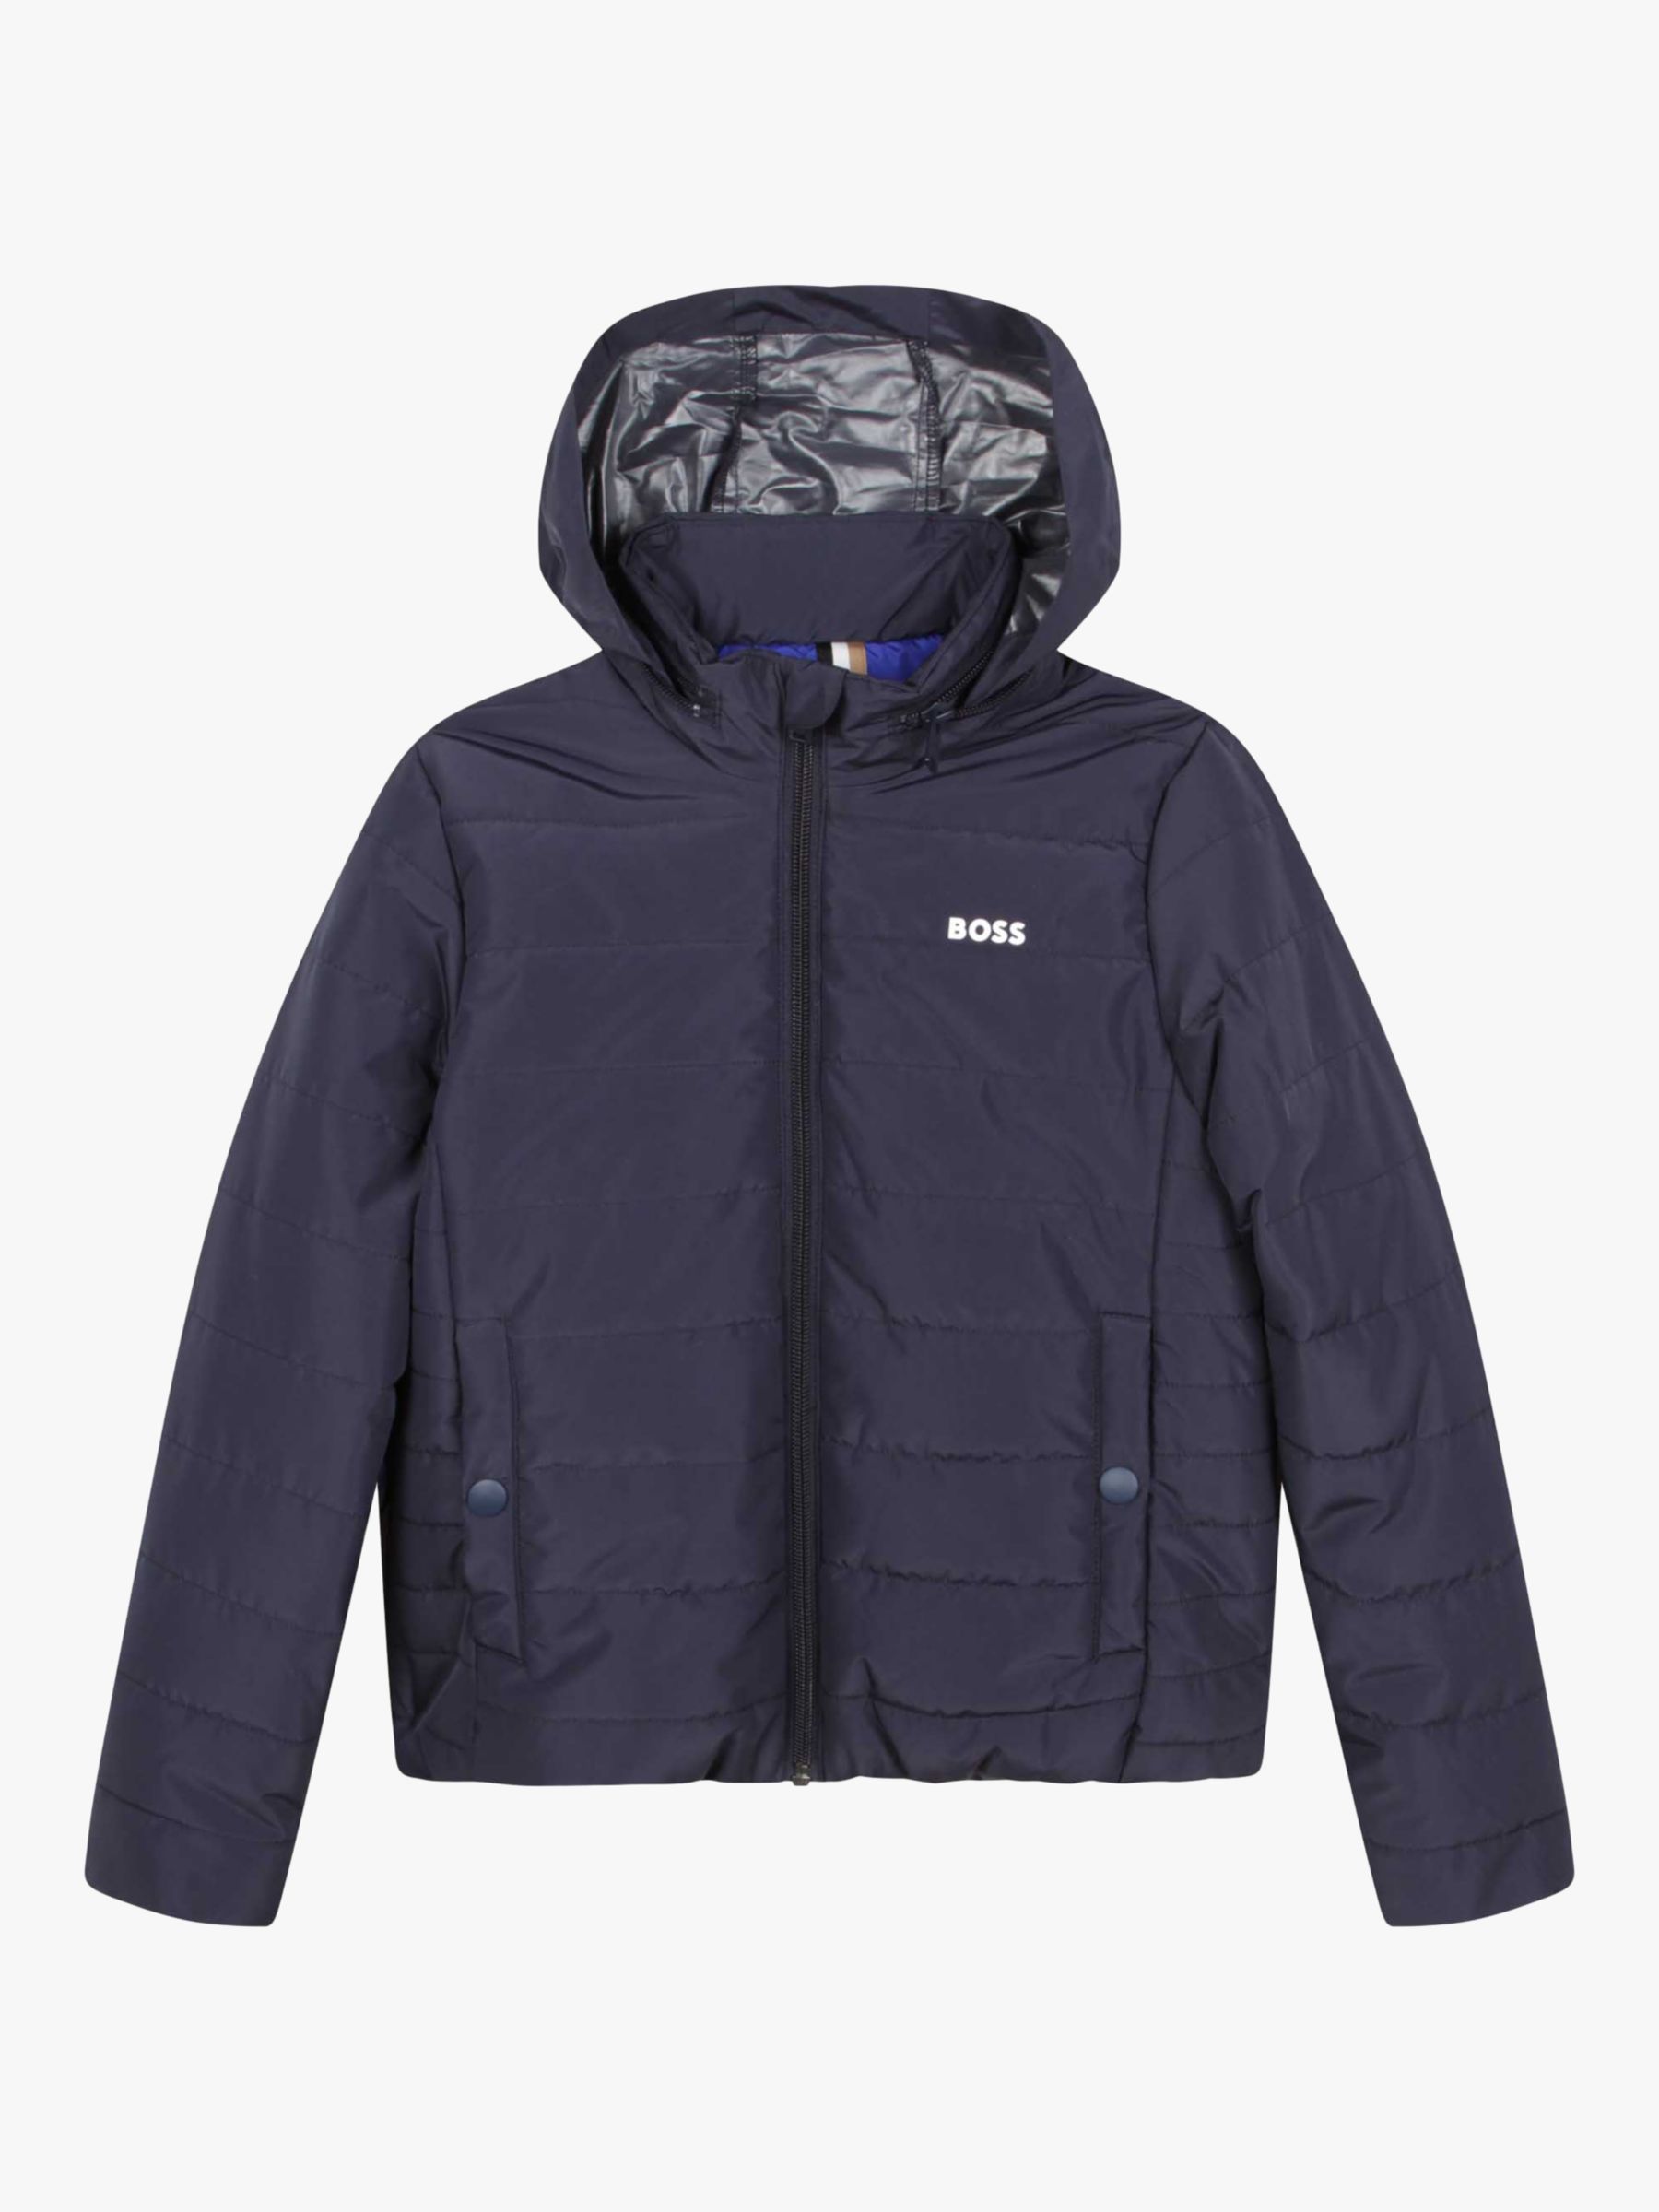 BOSS Kids' Hooded Quilted Jacket, Navy, 4 years